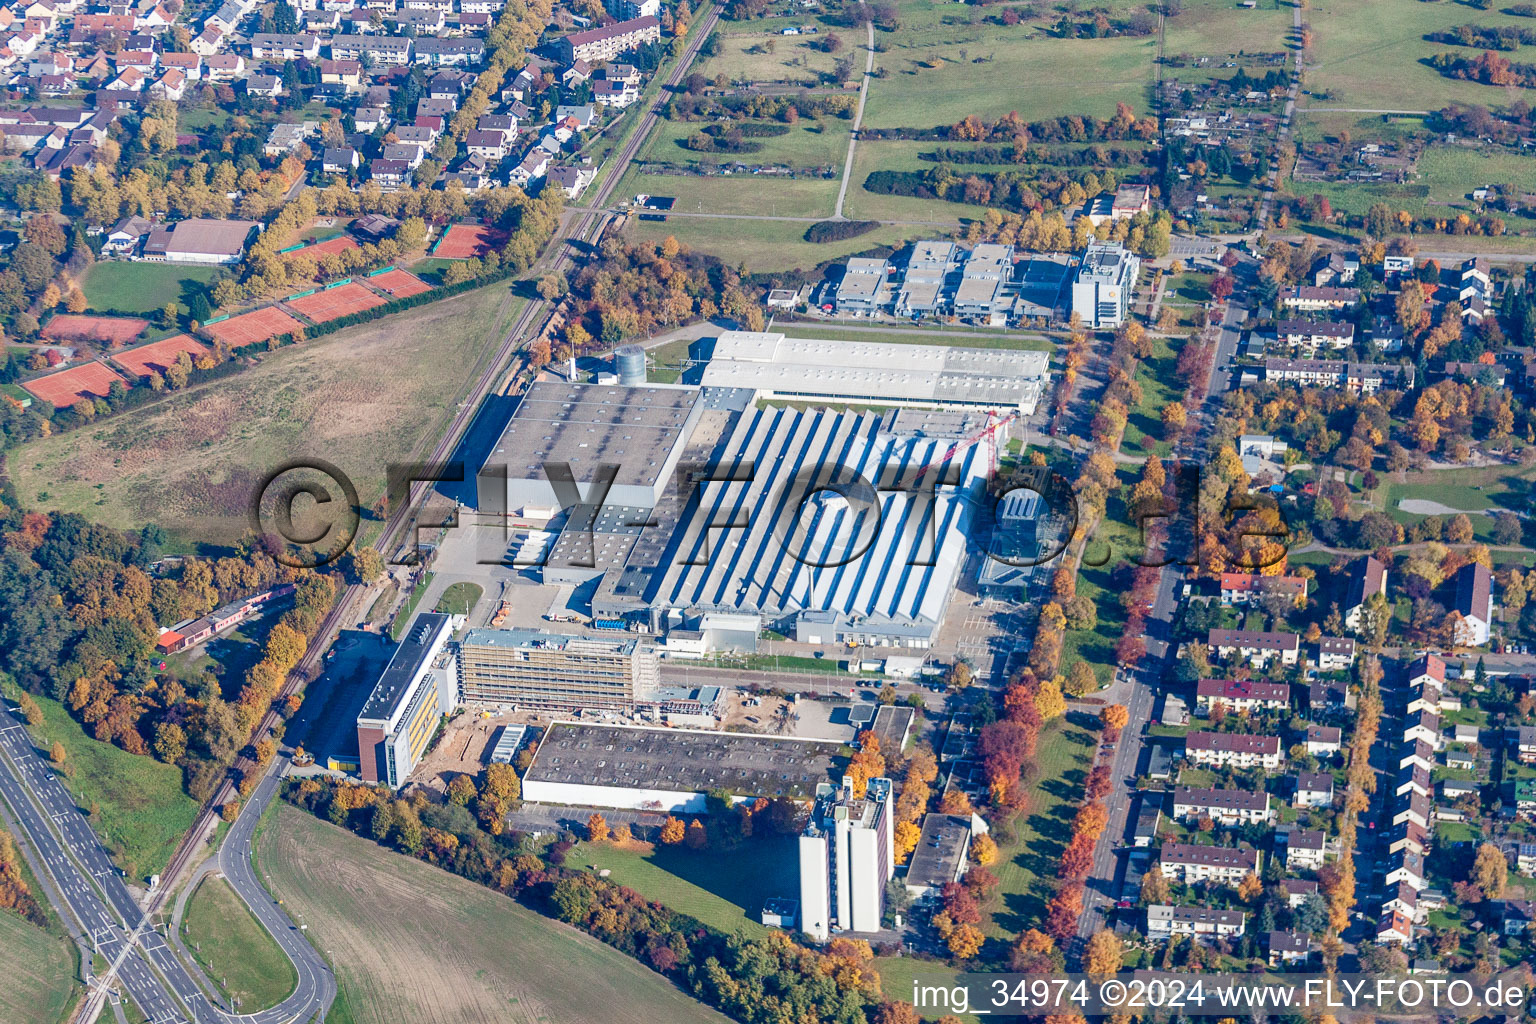 Building and production halls on the premises of the chemical manufacturers L'OREAL Produktion Deutschland GmbH & Co. KG in the district Nordweststadt in Karlsruhe in the state Baden-Wurttemberg, Germany